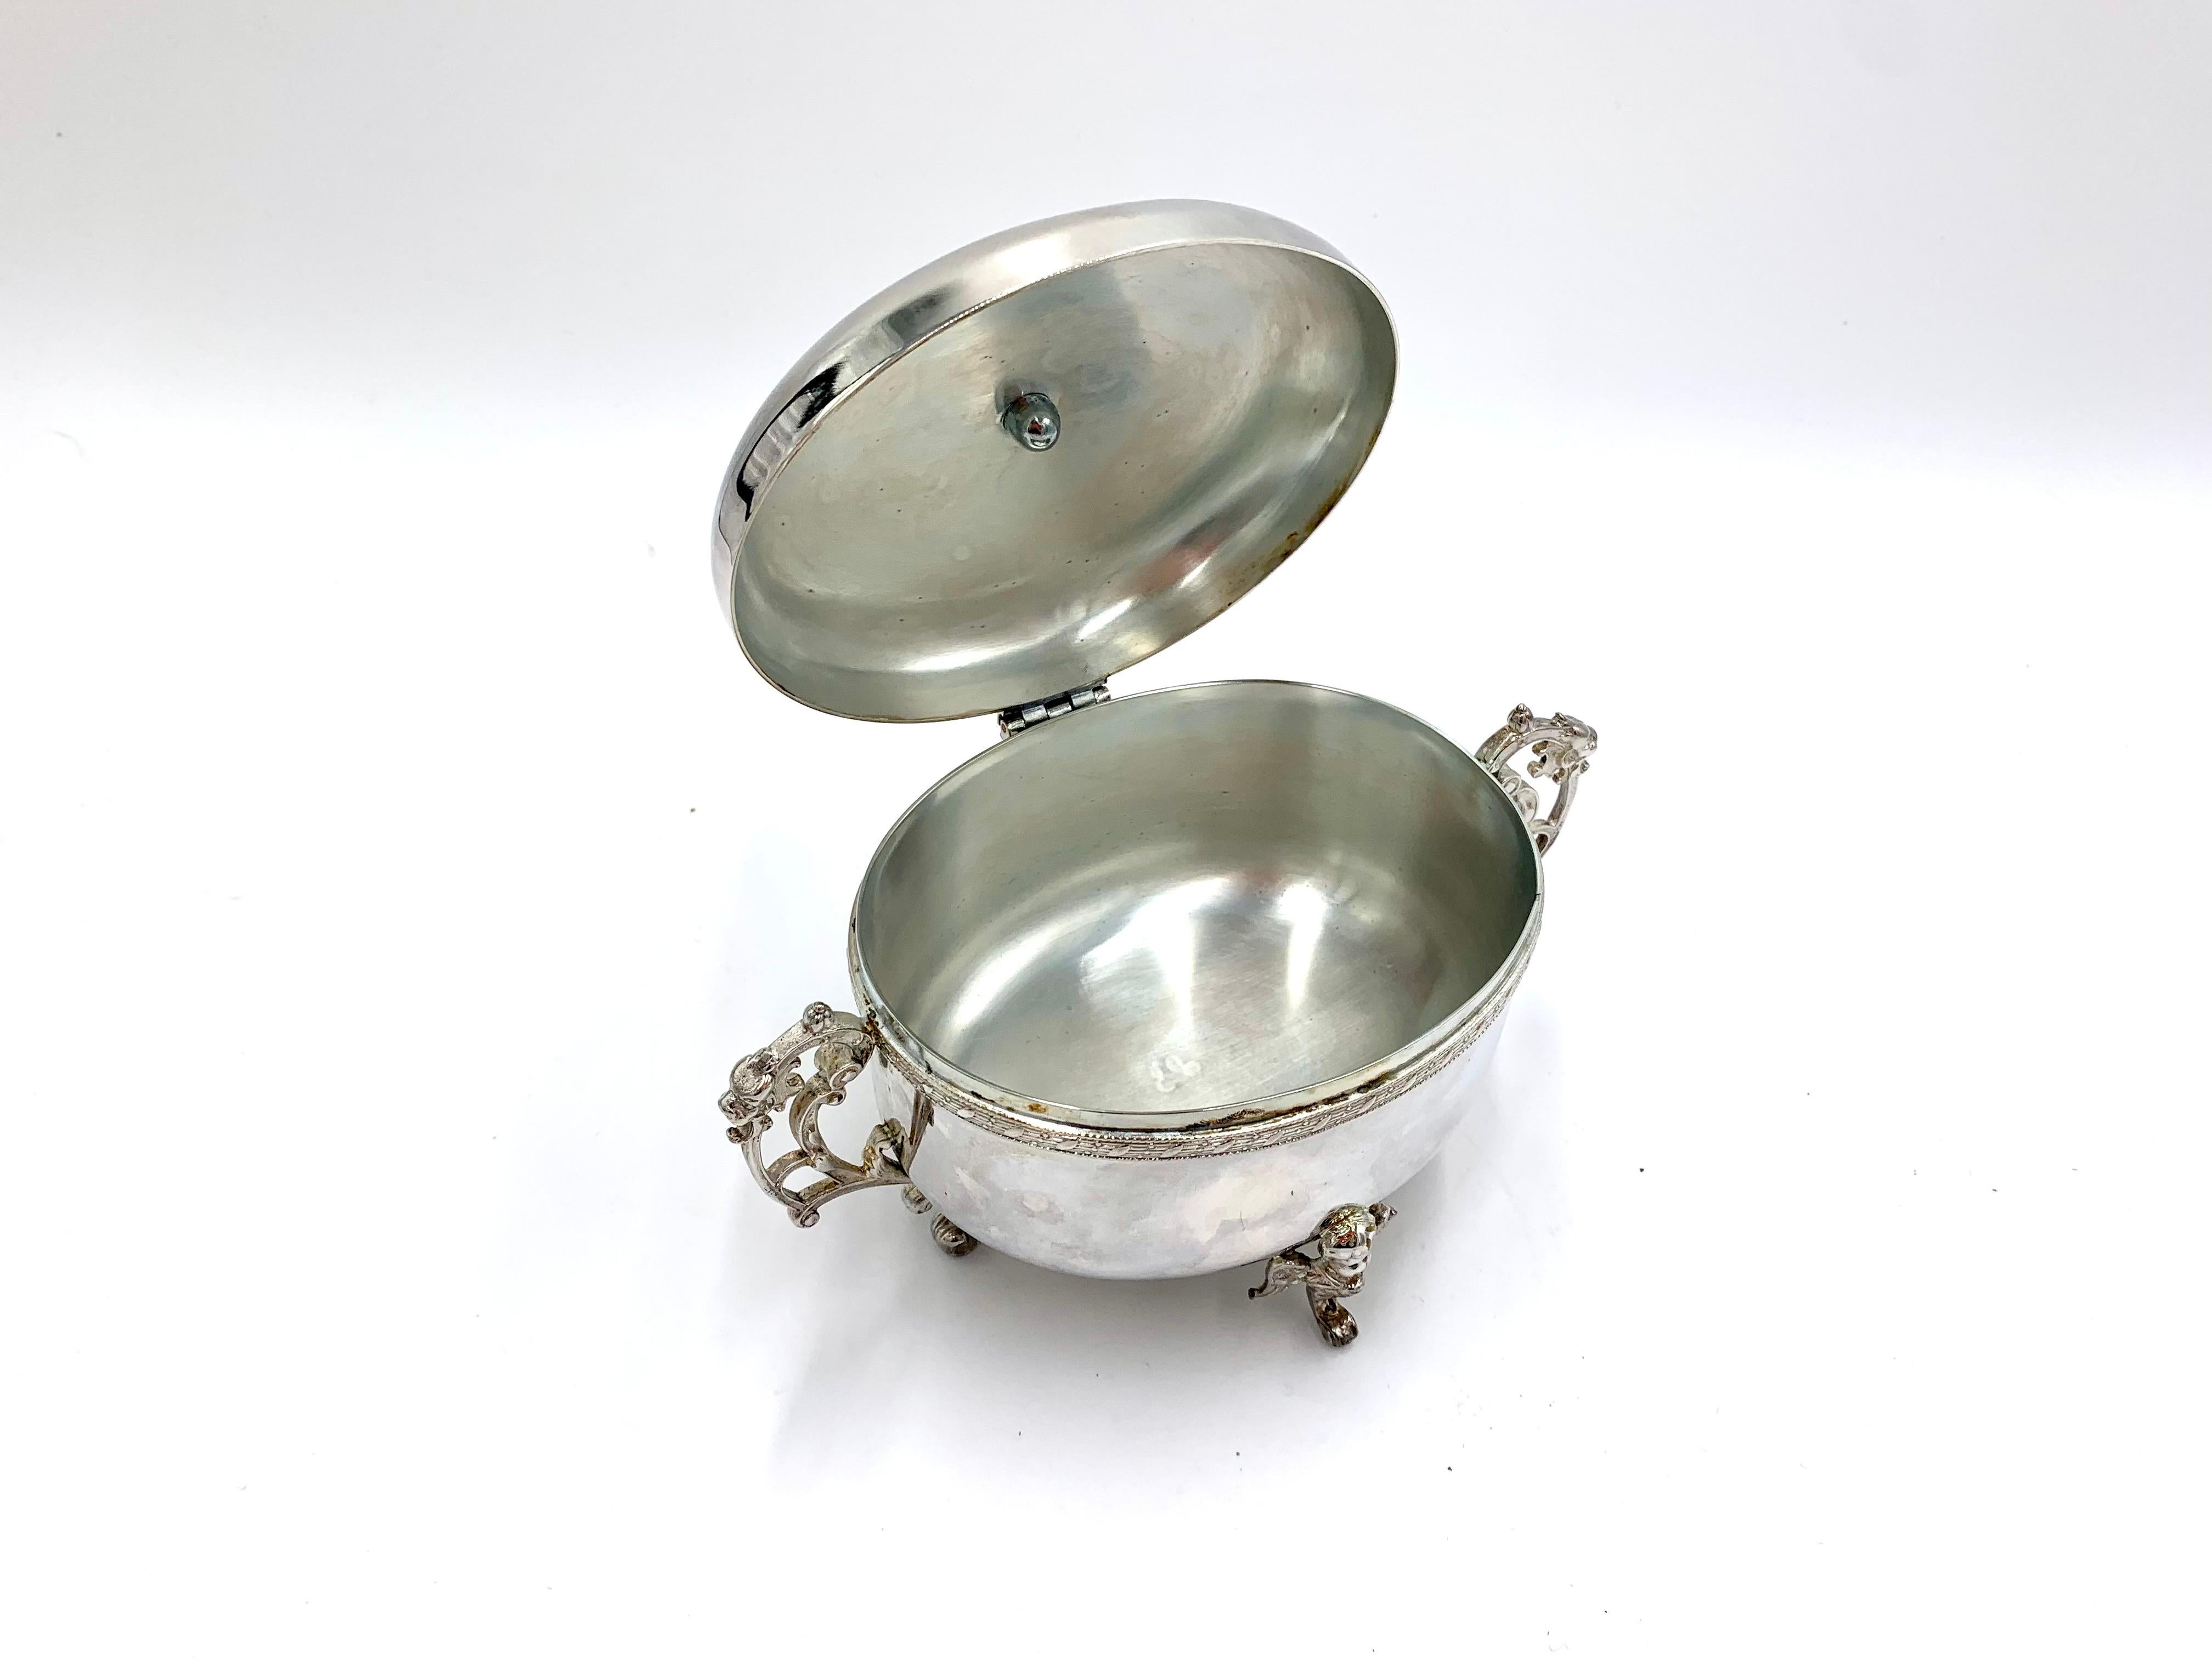 Mid-20th Century Silver-Plated Sugar Bowl with a Spoon, Fraget Hefra